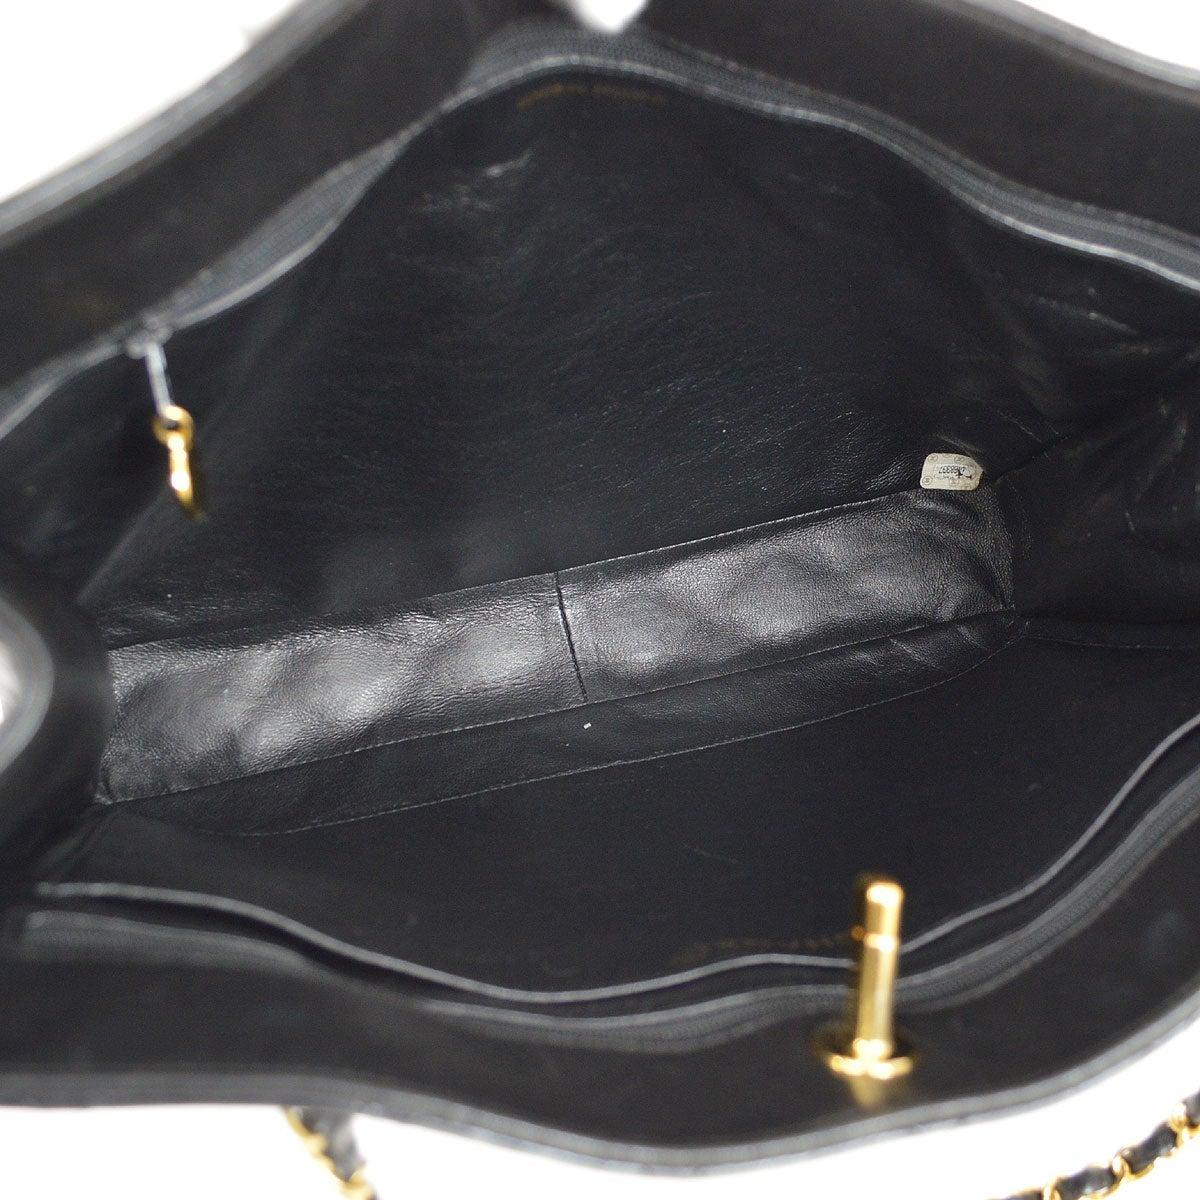 CHANEL Black Lambskin Leather Gold Large Shopper Carryall Shoulder Tote Bag In Good Condition For Sale In Chicago, IL